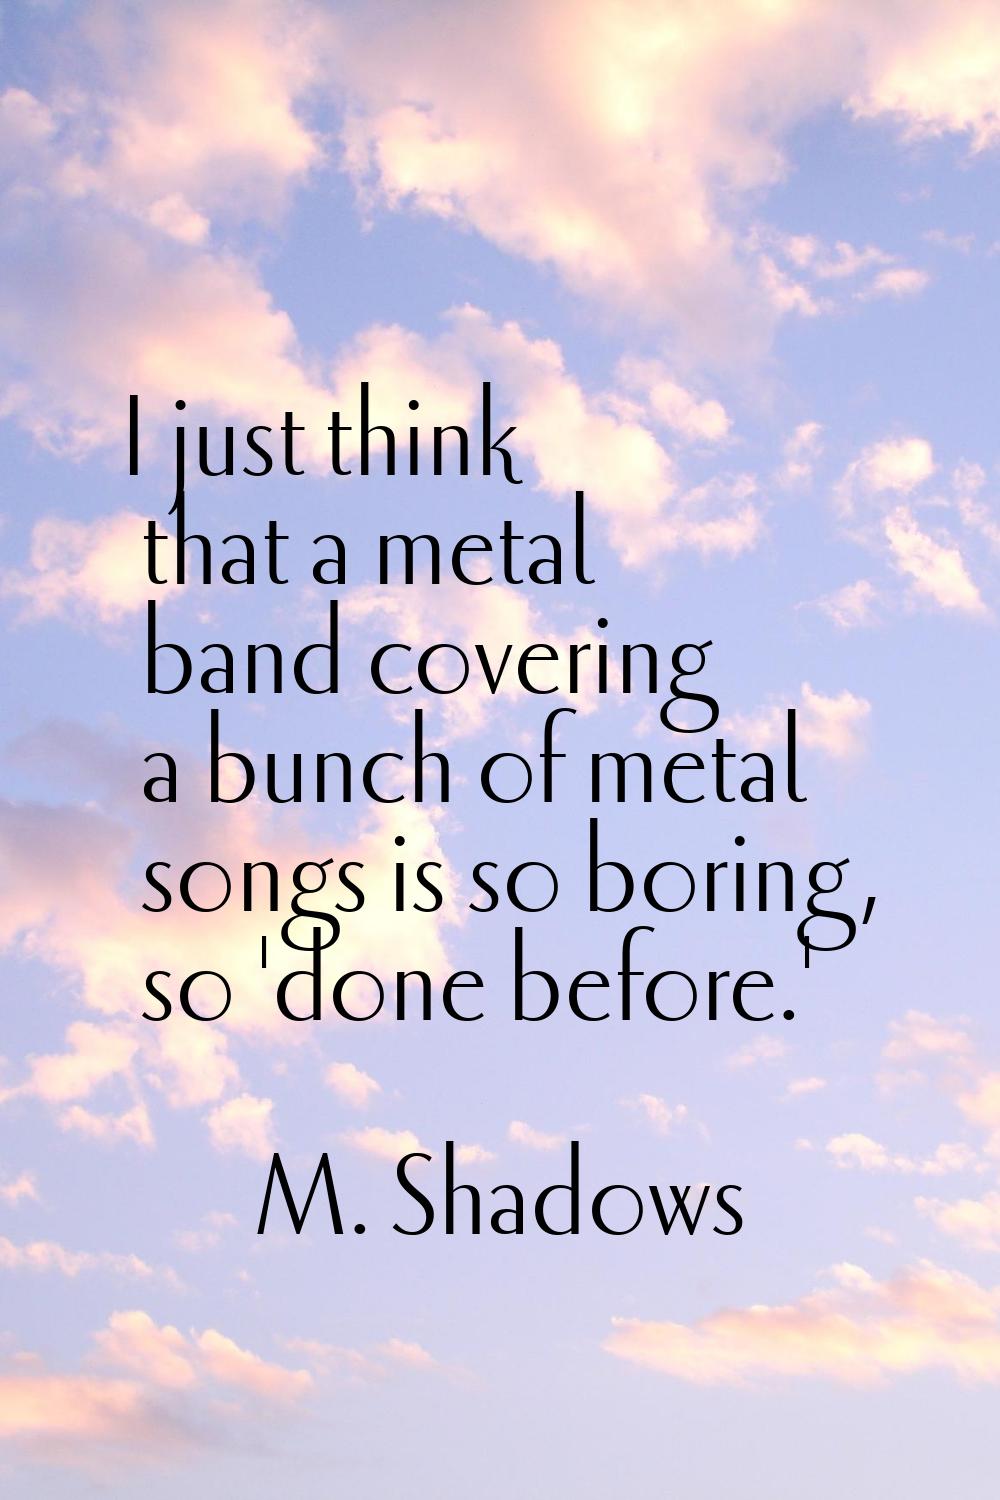 I just think that a metal band covering a bunch of metal songs is so boring, so 'done before.'